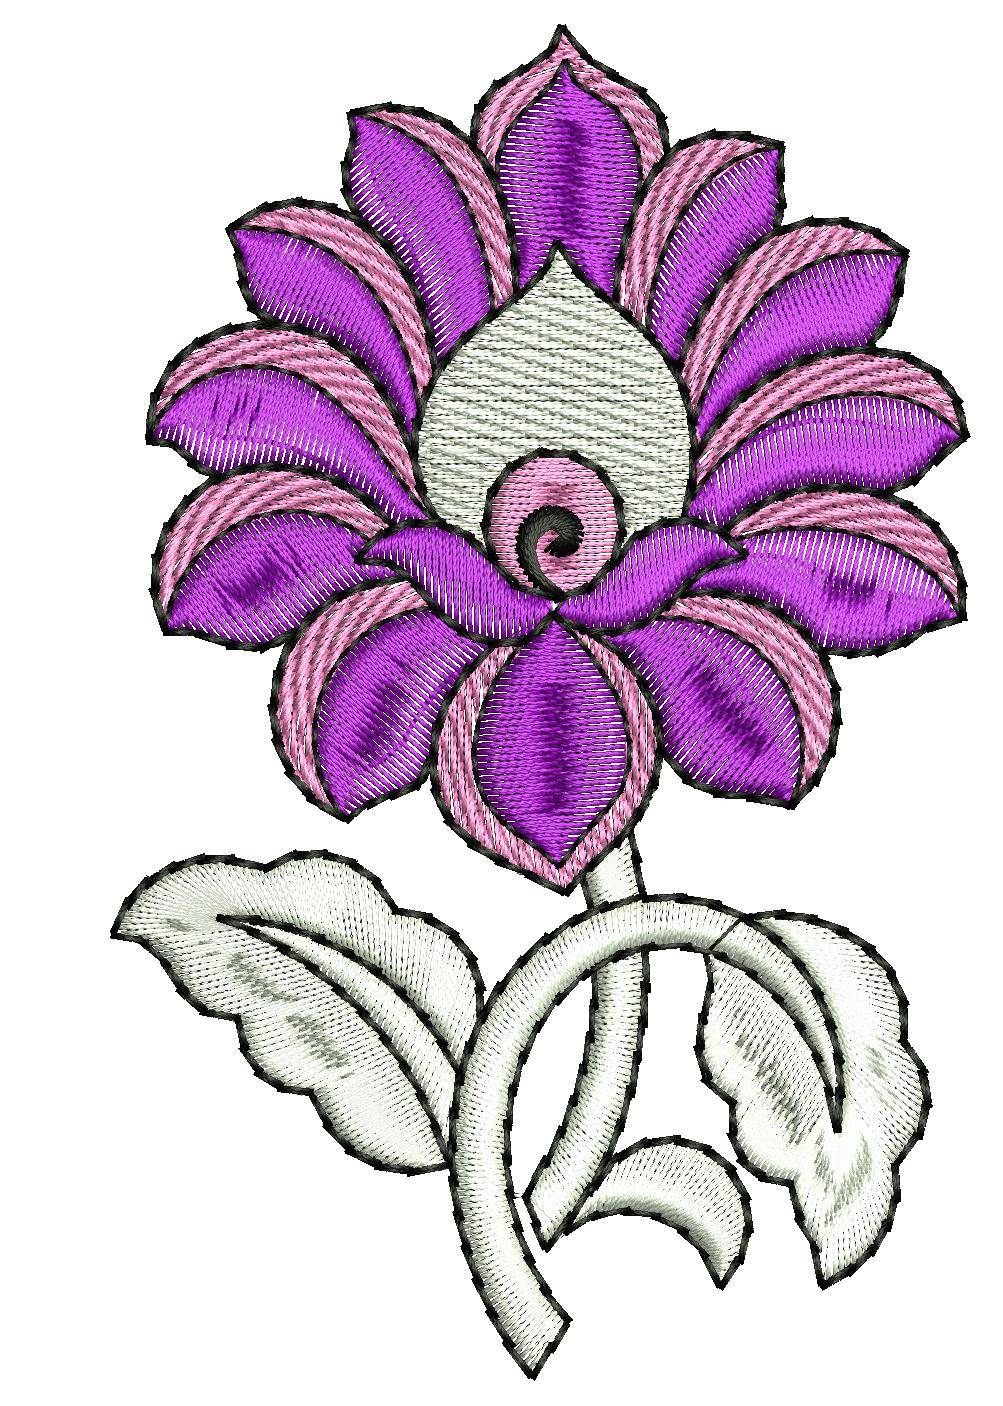 Funky Embroidery Patterns 10 Flower Embroidery Designs Images Top Collection Of Different